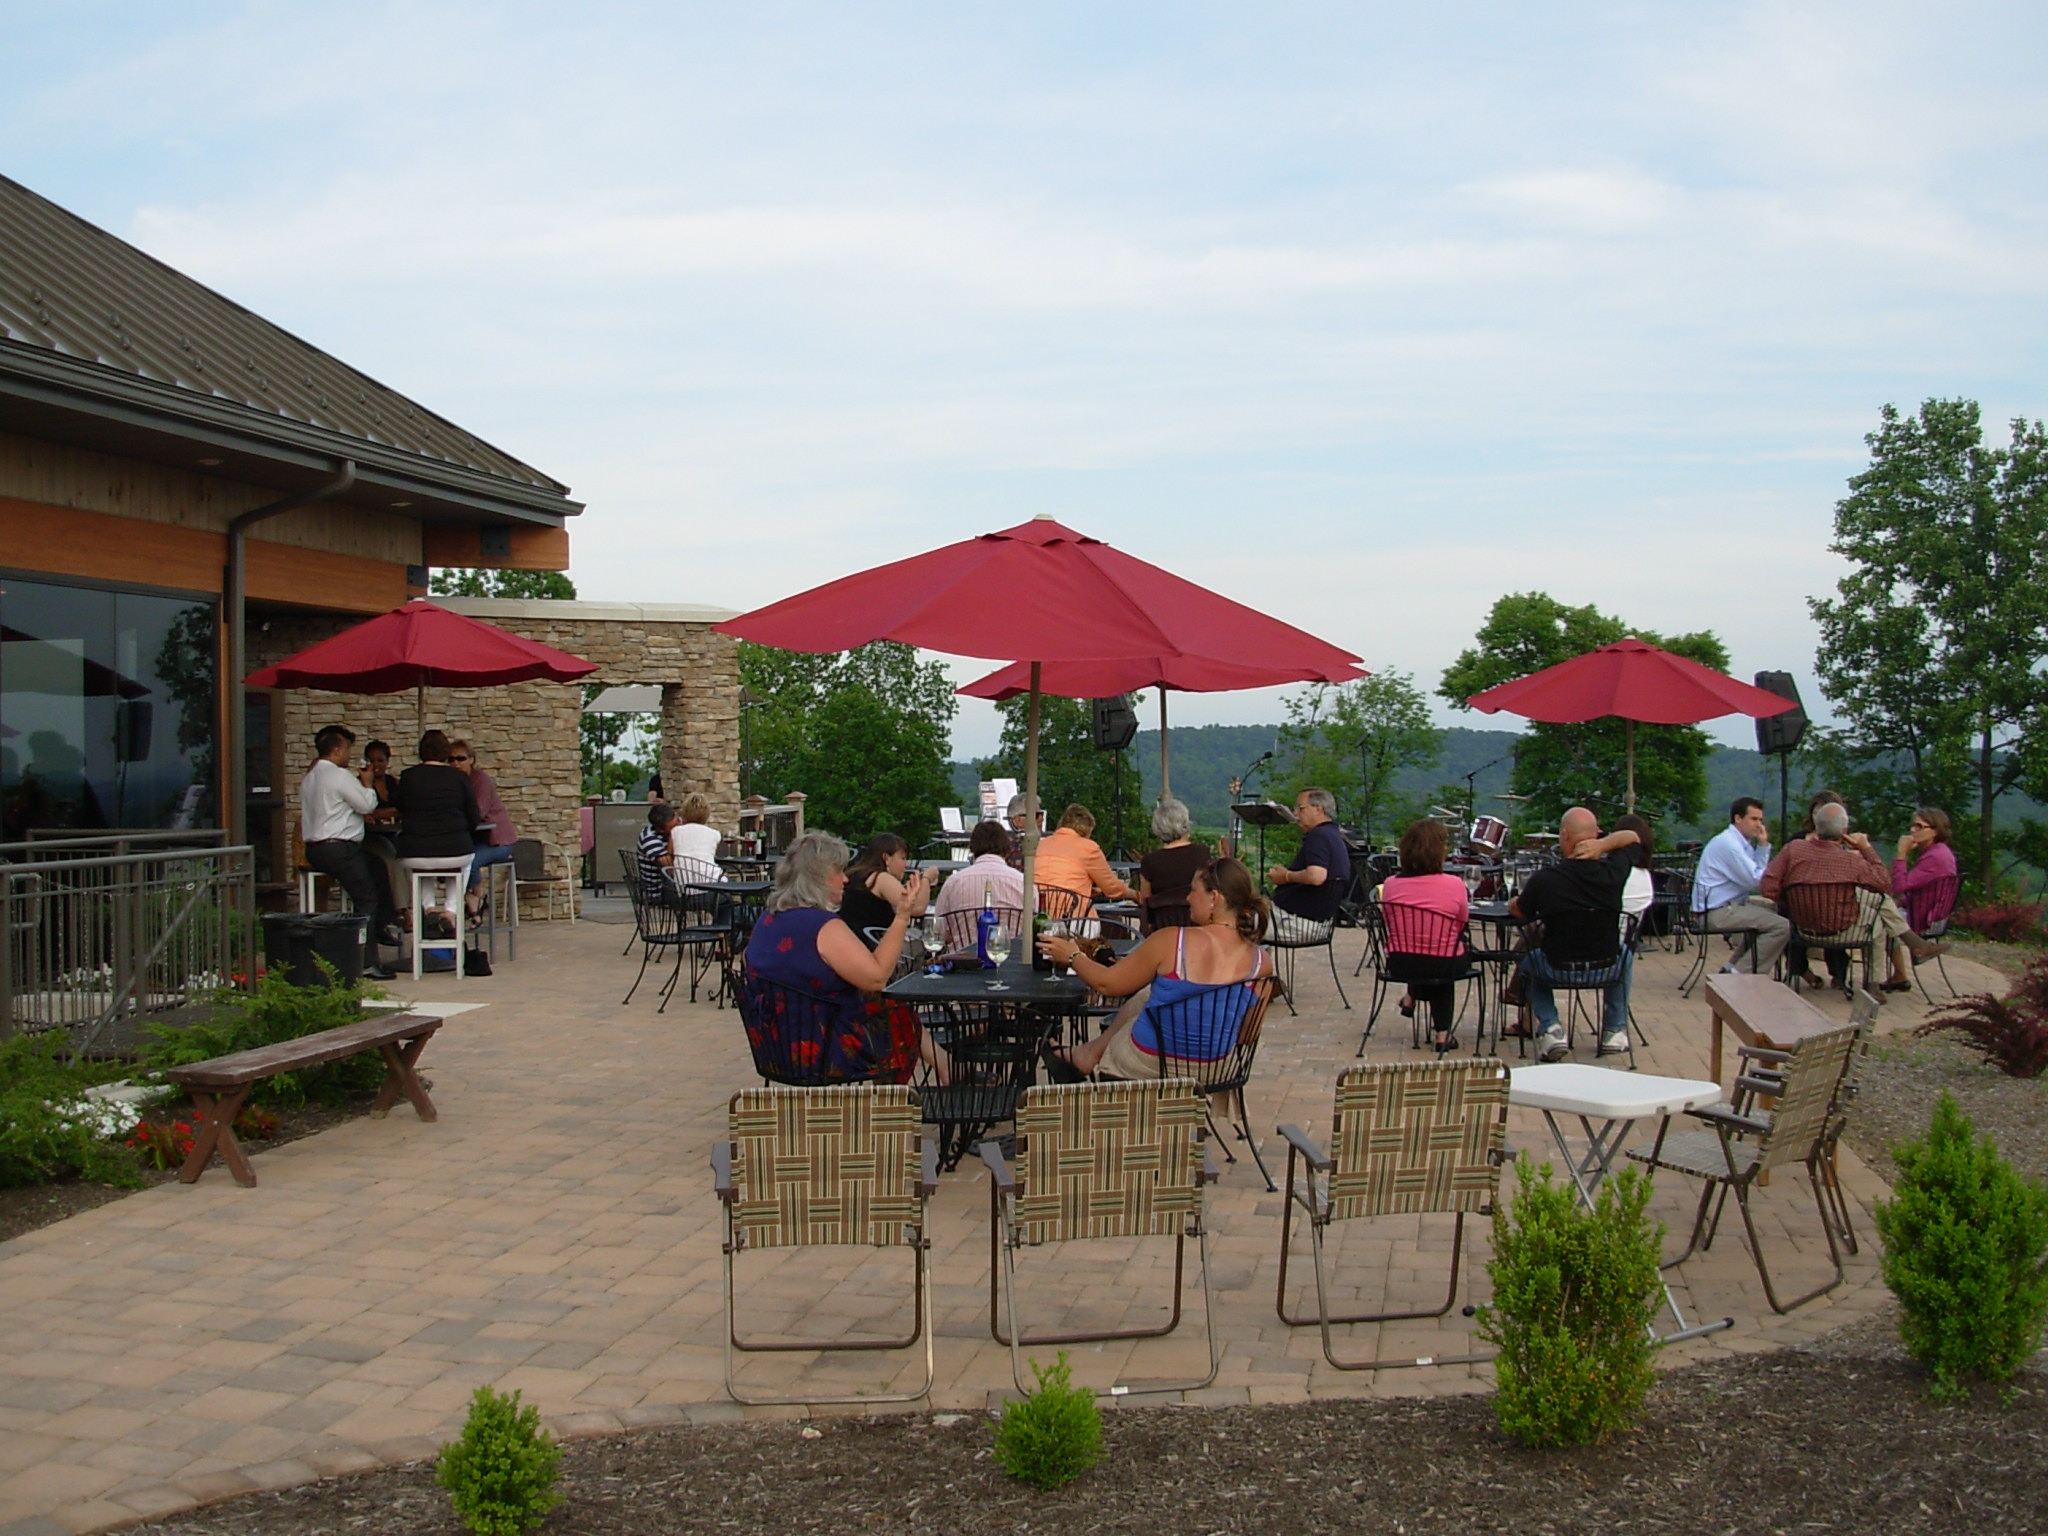 Hauser Estate Winery outside seating area for concerts
